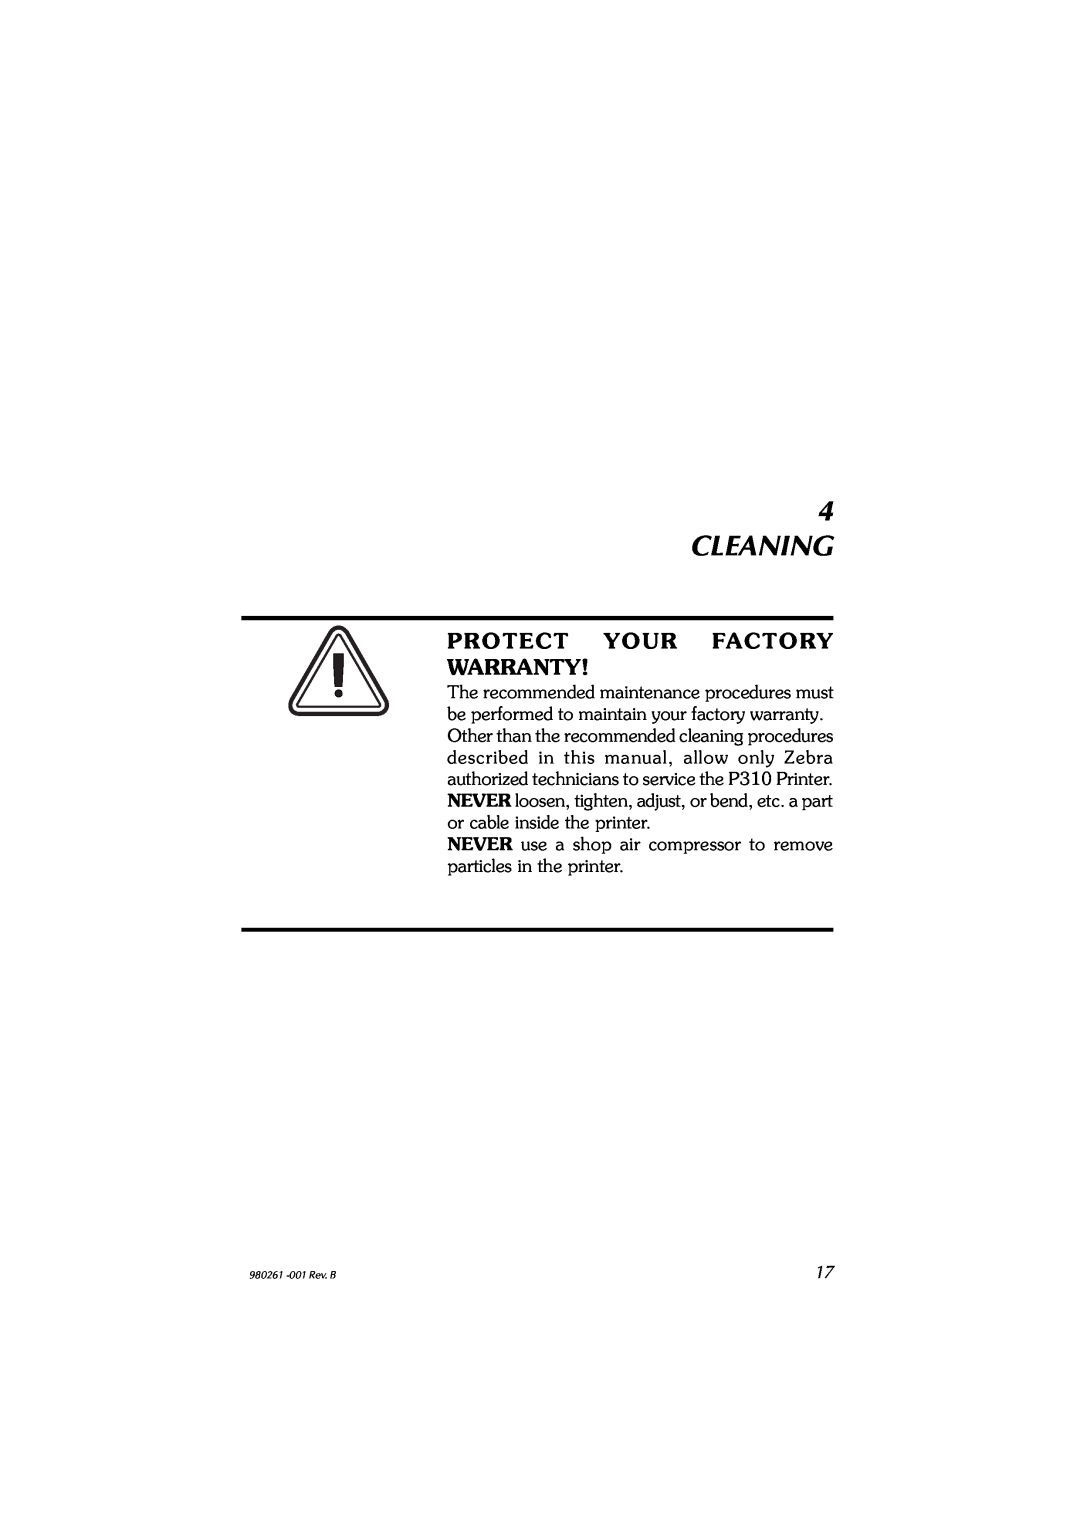 Zebra Technologies P310C, P310F user manual Cleaning, Protect Your Factory Warranty 